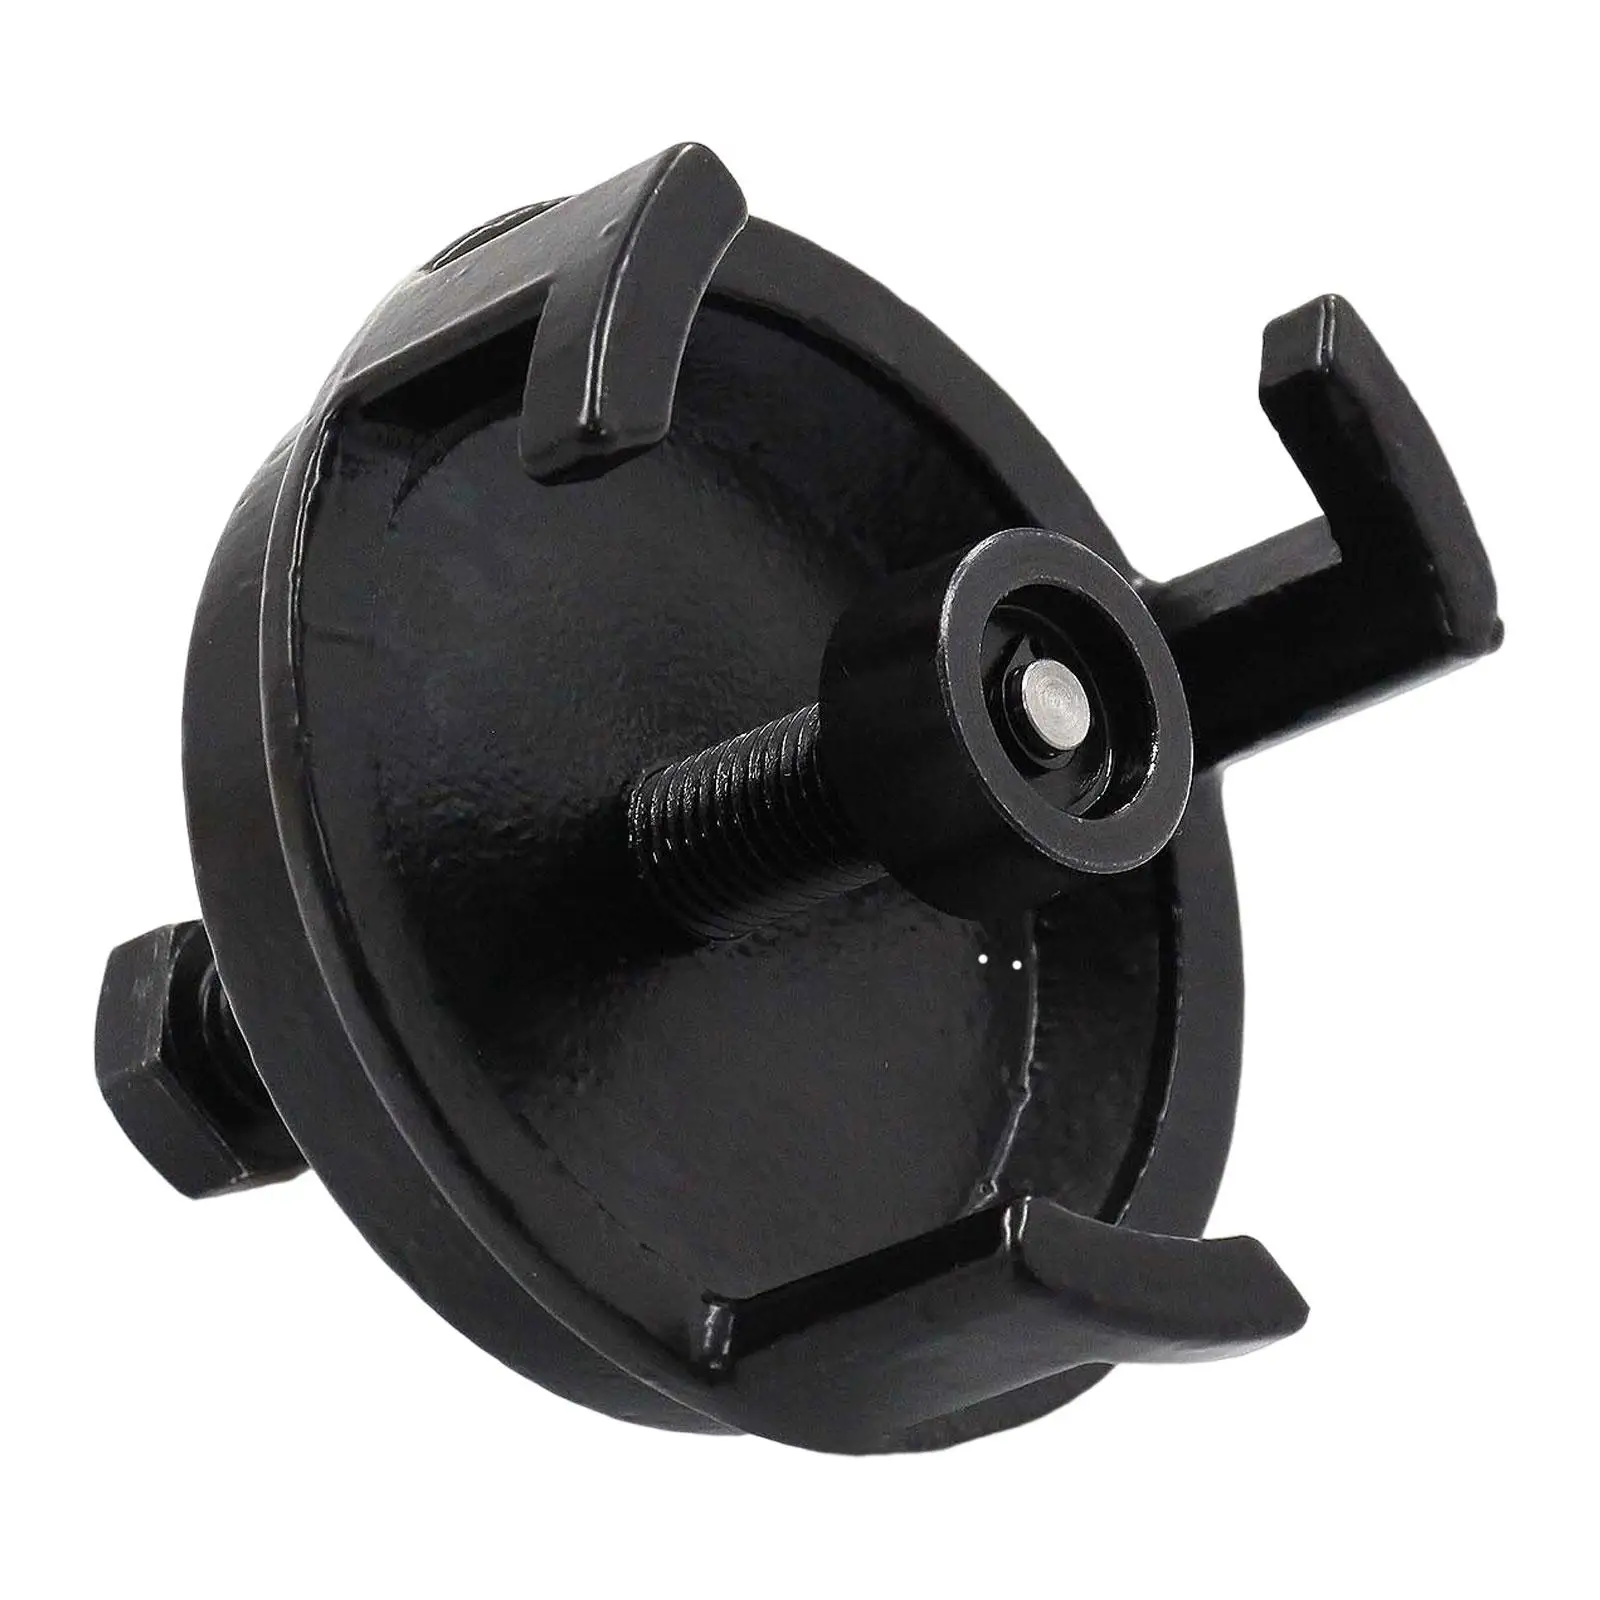 Harmonic Balancer Puller Devices Easy Using Components Replaces Durable for Auto Removal Tool Professional Crank Pulley